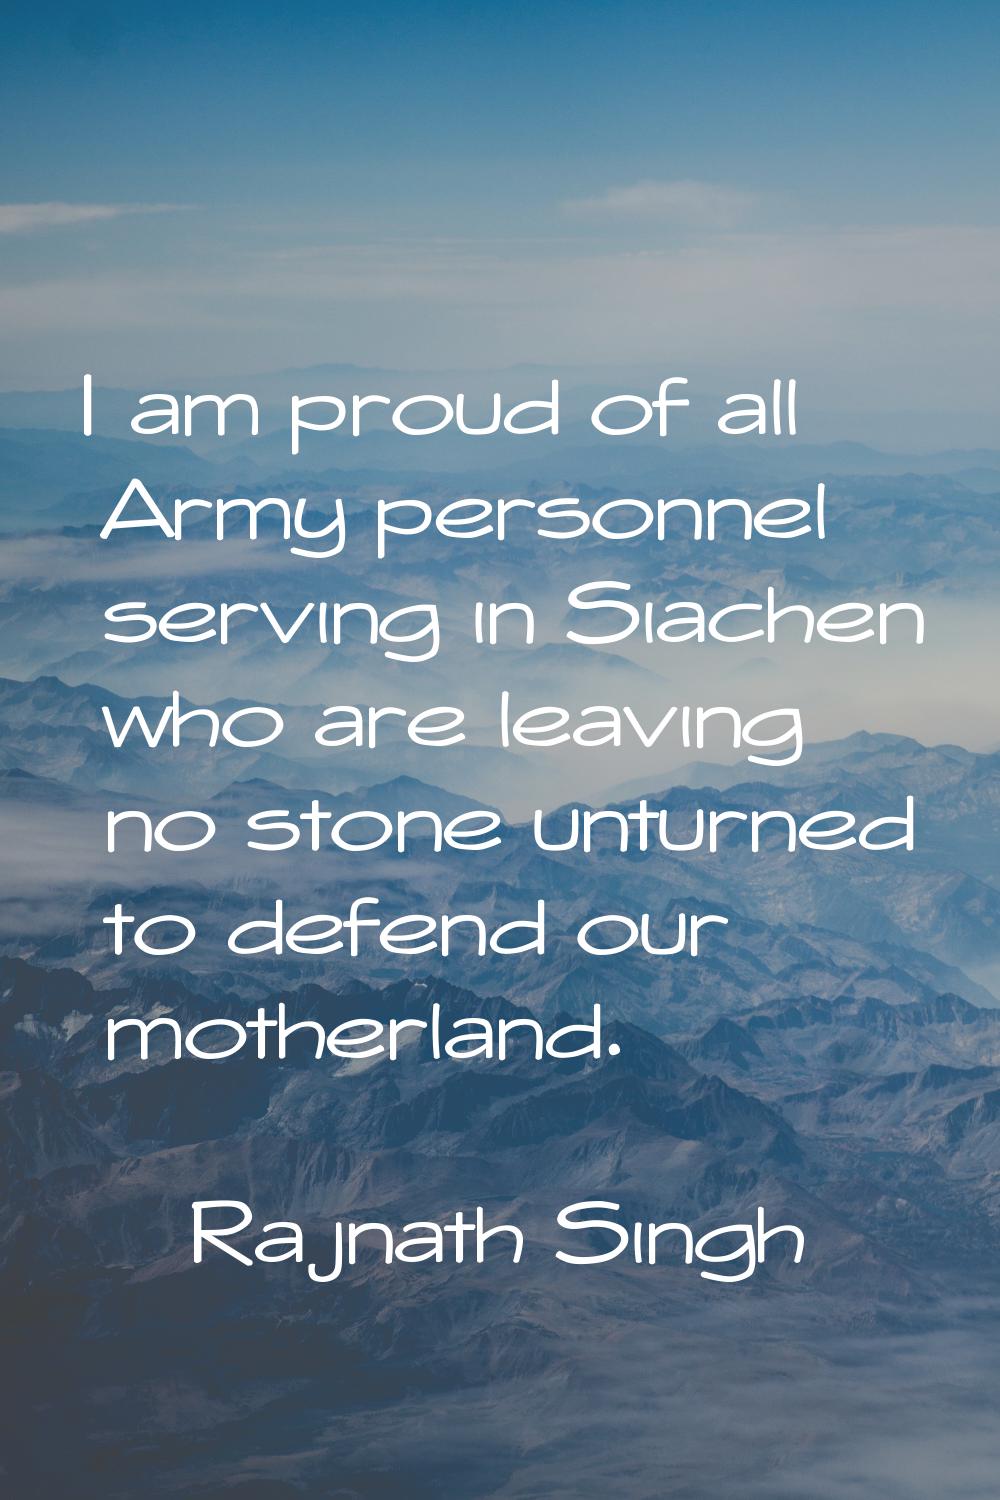 I am proud of all Army personnel serving in Siachen who are leaving no stone unturned to defend our